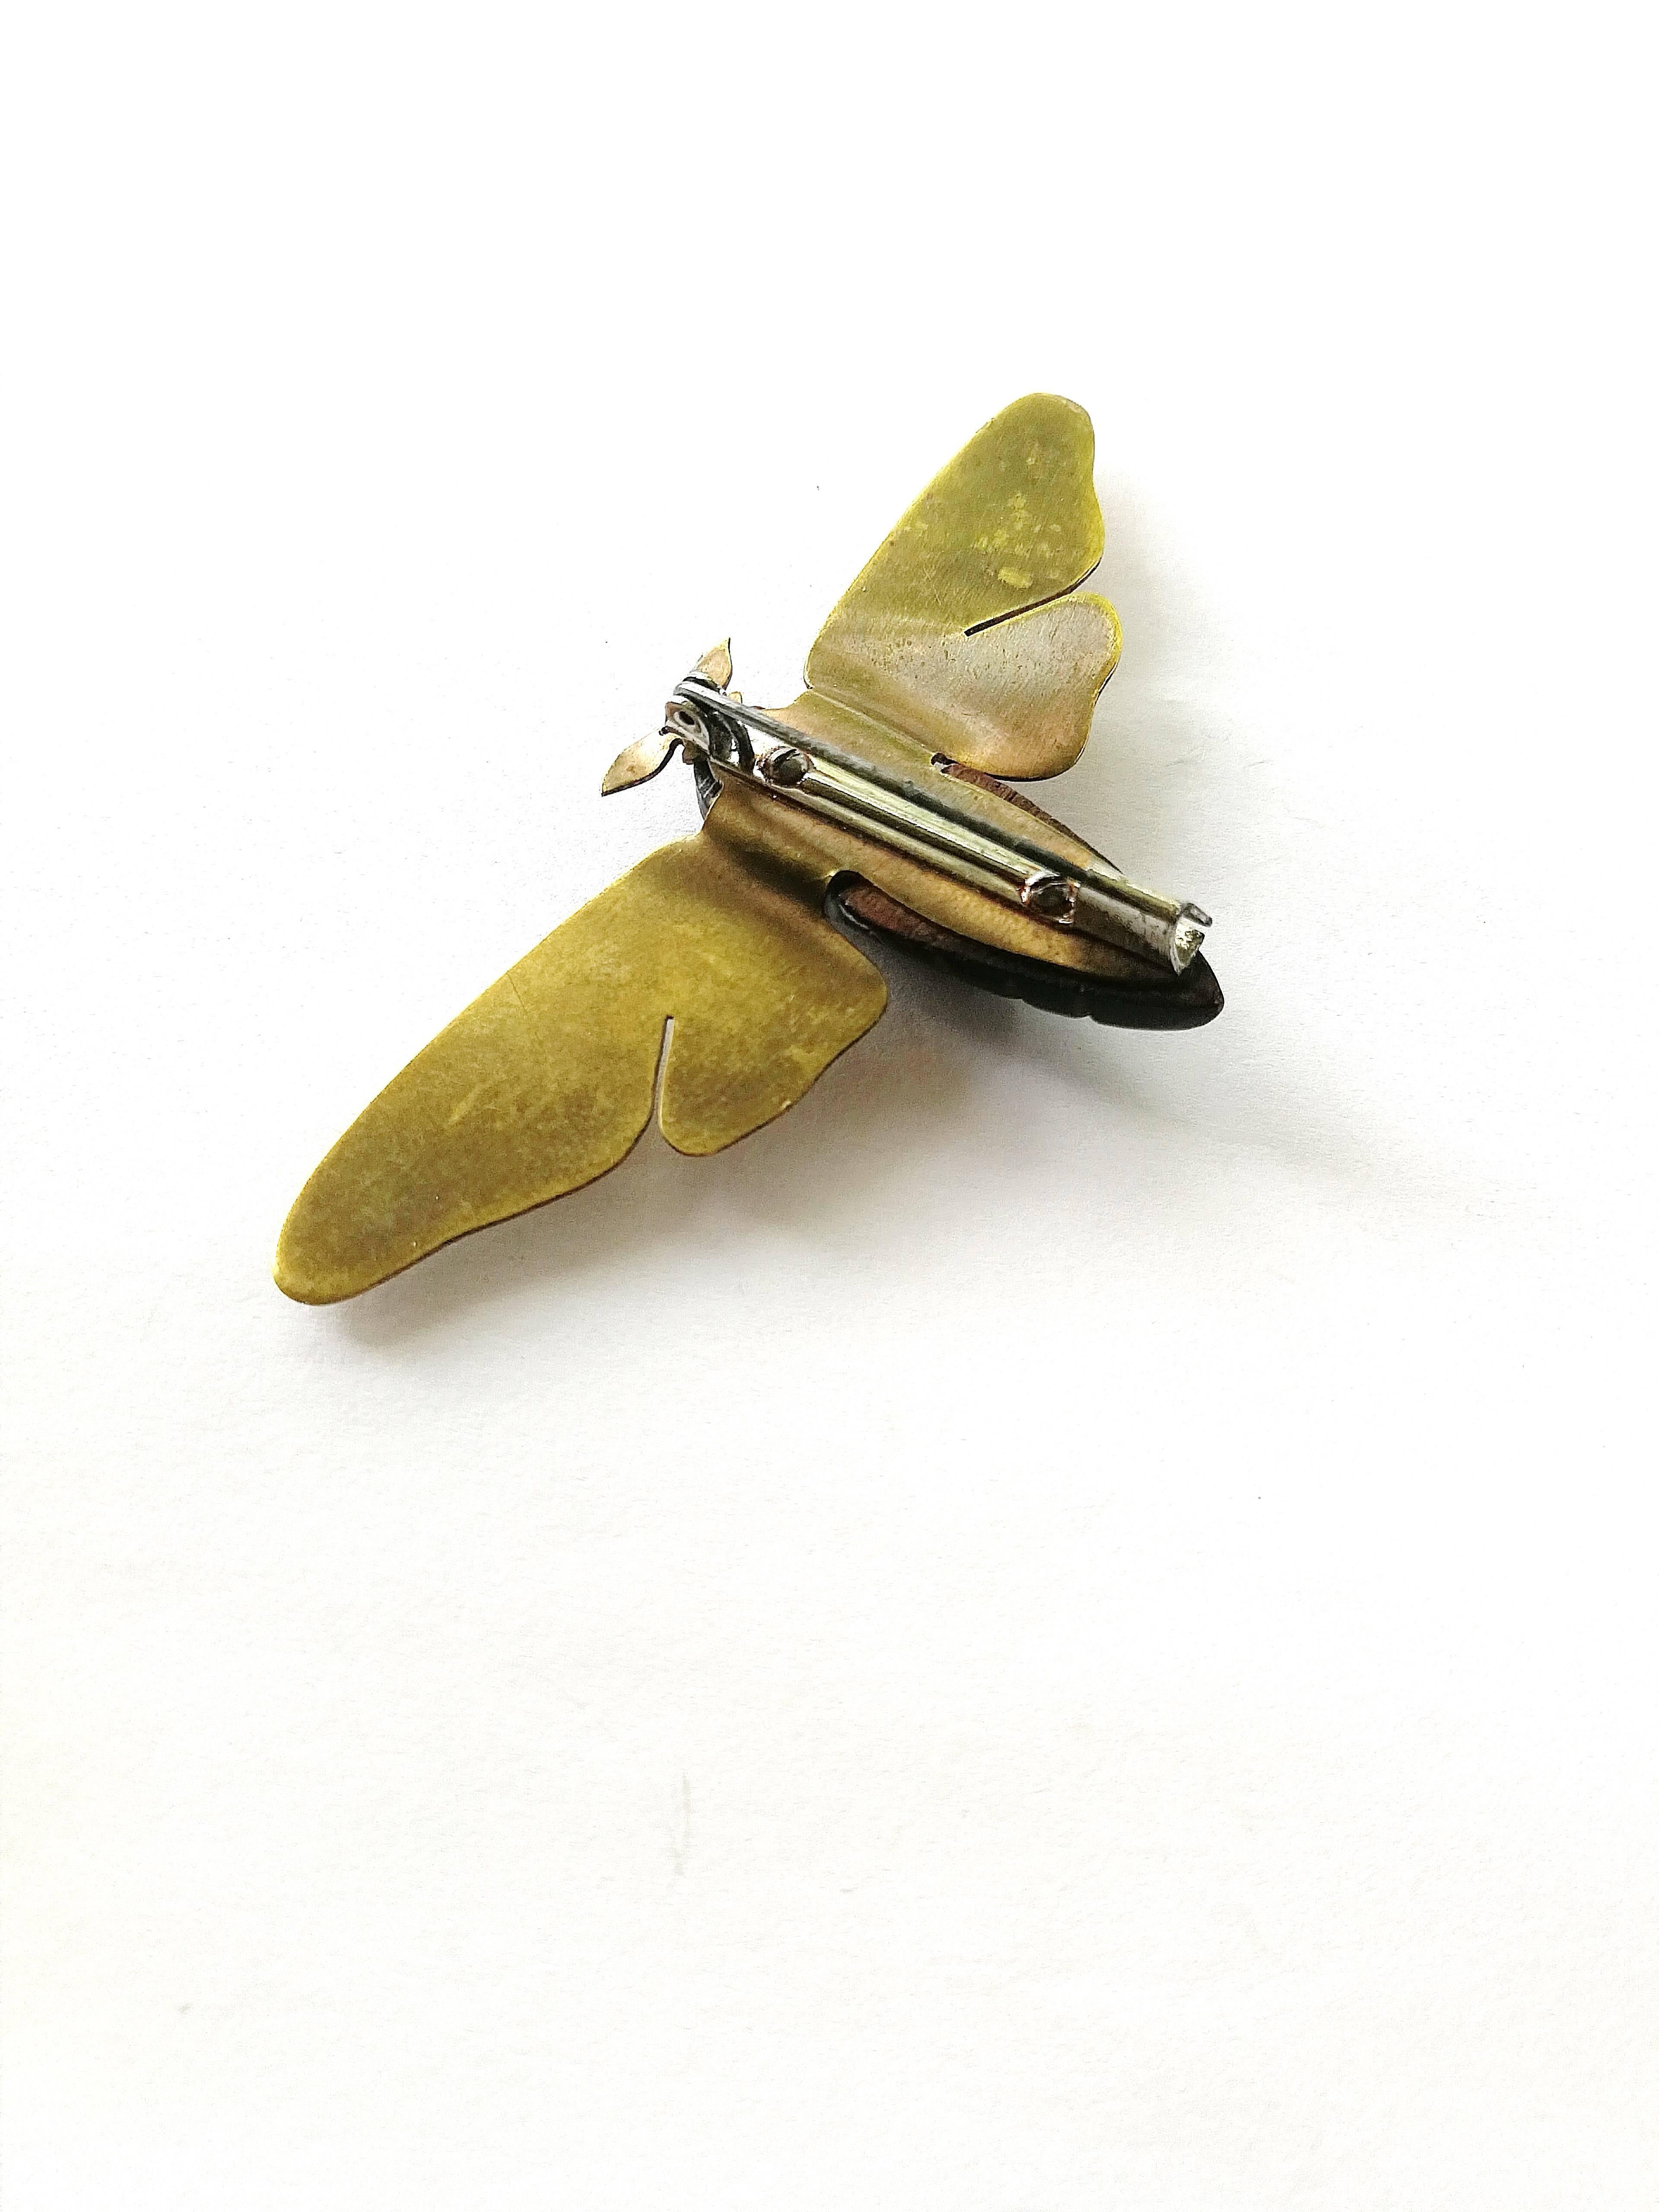 A stunning 'moth' brooch, very simple, sculpted and architectural in its design. The brass wings and ears are all one piece and engraved, the wood body, carved and polished.
It has a secure pin and hook fitting. Unsigned, it is part of a series on